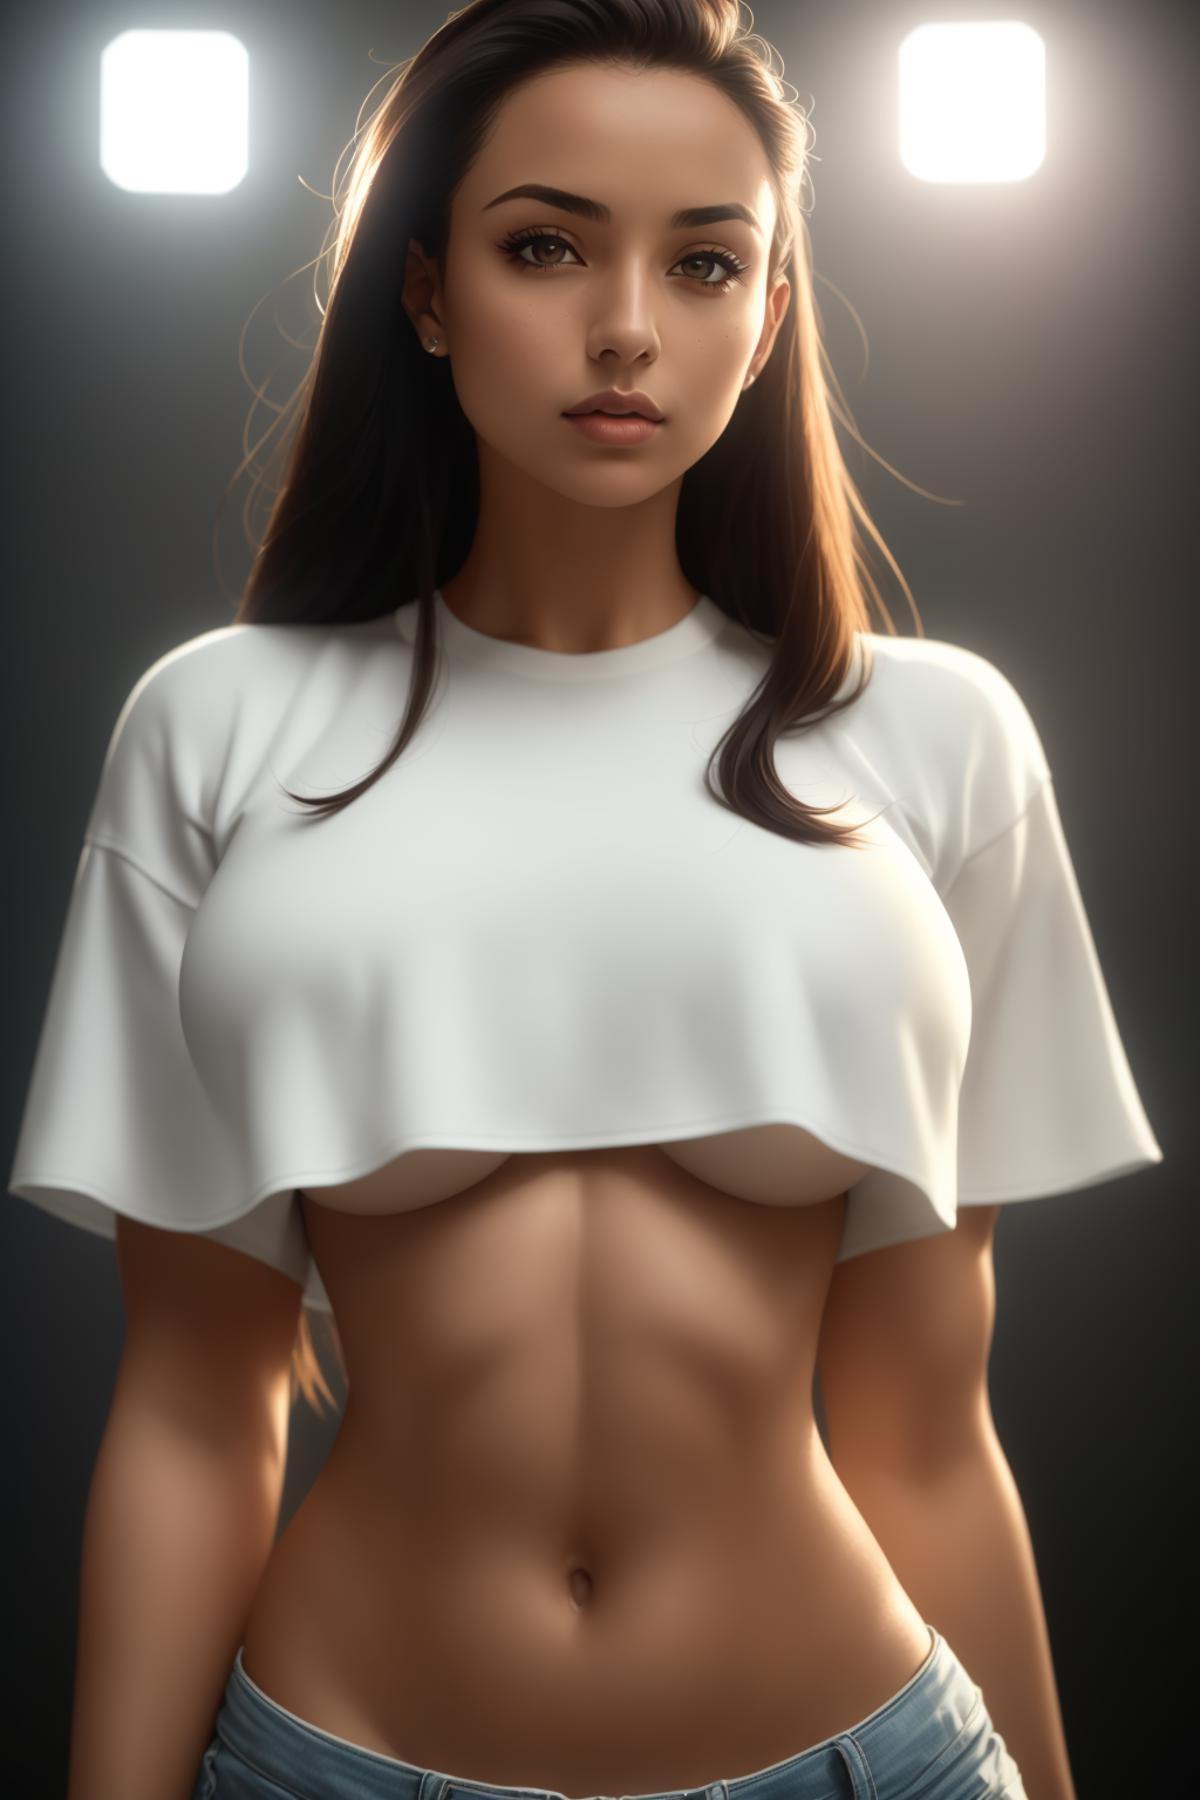 AI model image by fitCorder